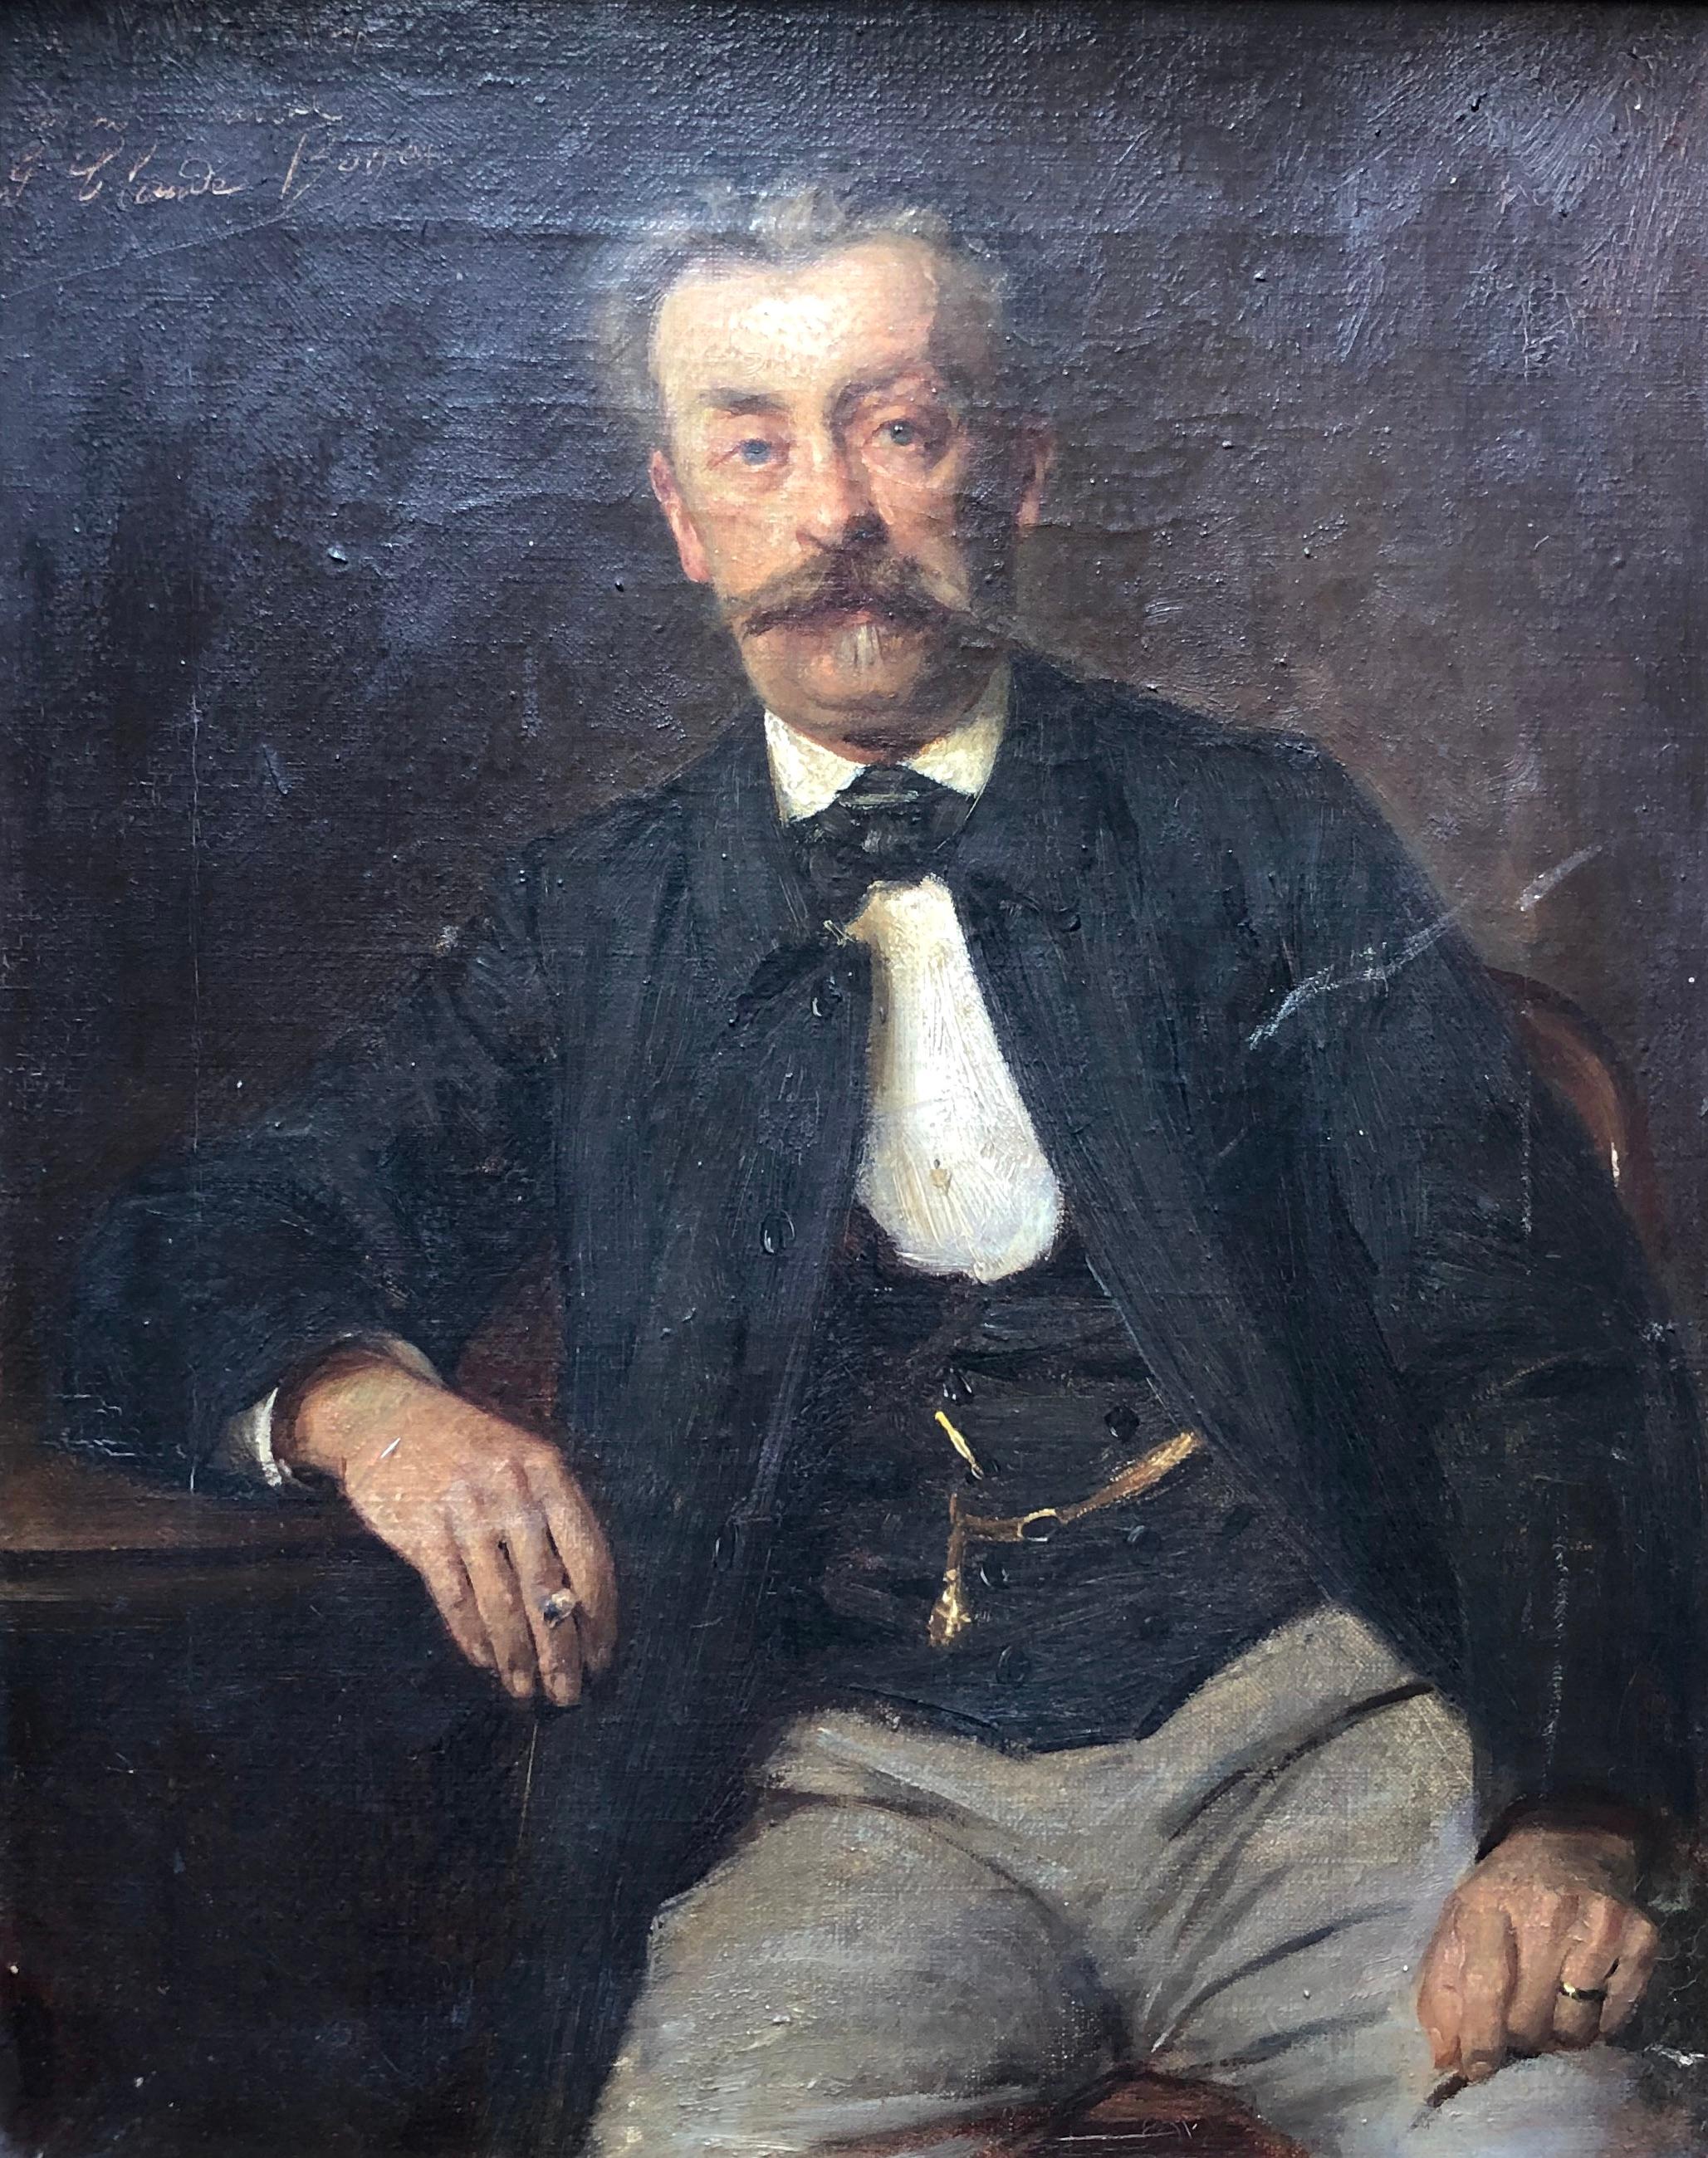 Portrait Of A Man, Oil On Canvas 19th Century, Signature To Identify - Painting by Unknown